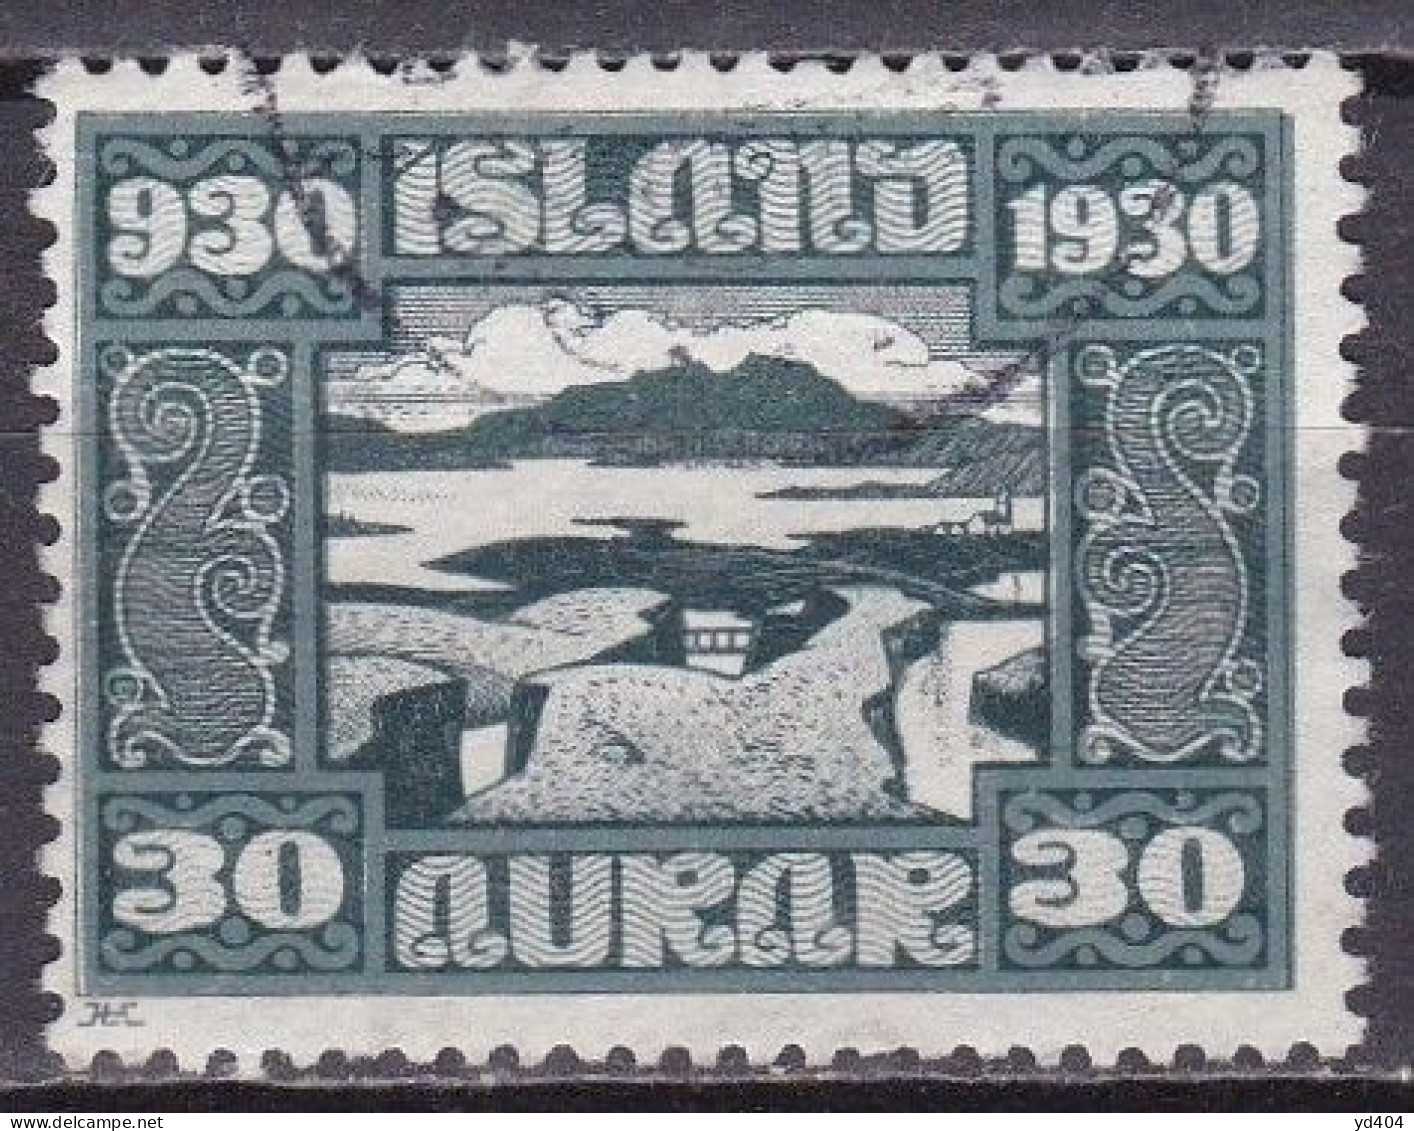 IS020H – ISLANDE – ICELAND – 1930 – MILLENARY OF THE ALTHING – SG # 165 USED 15 € - Oblitérés